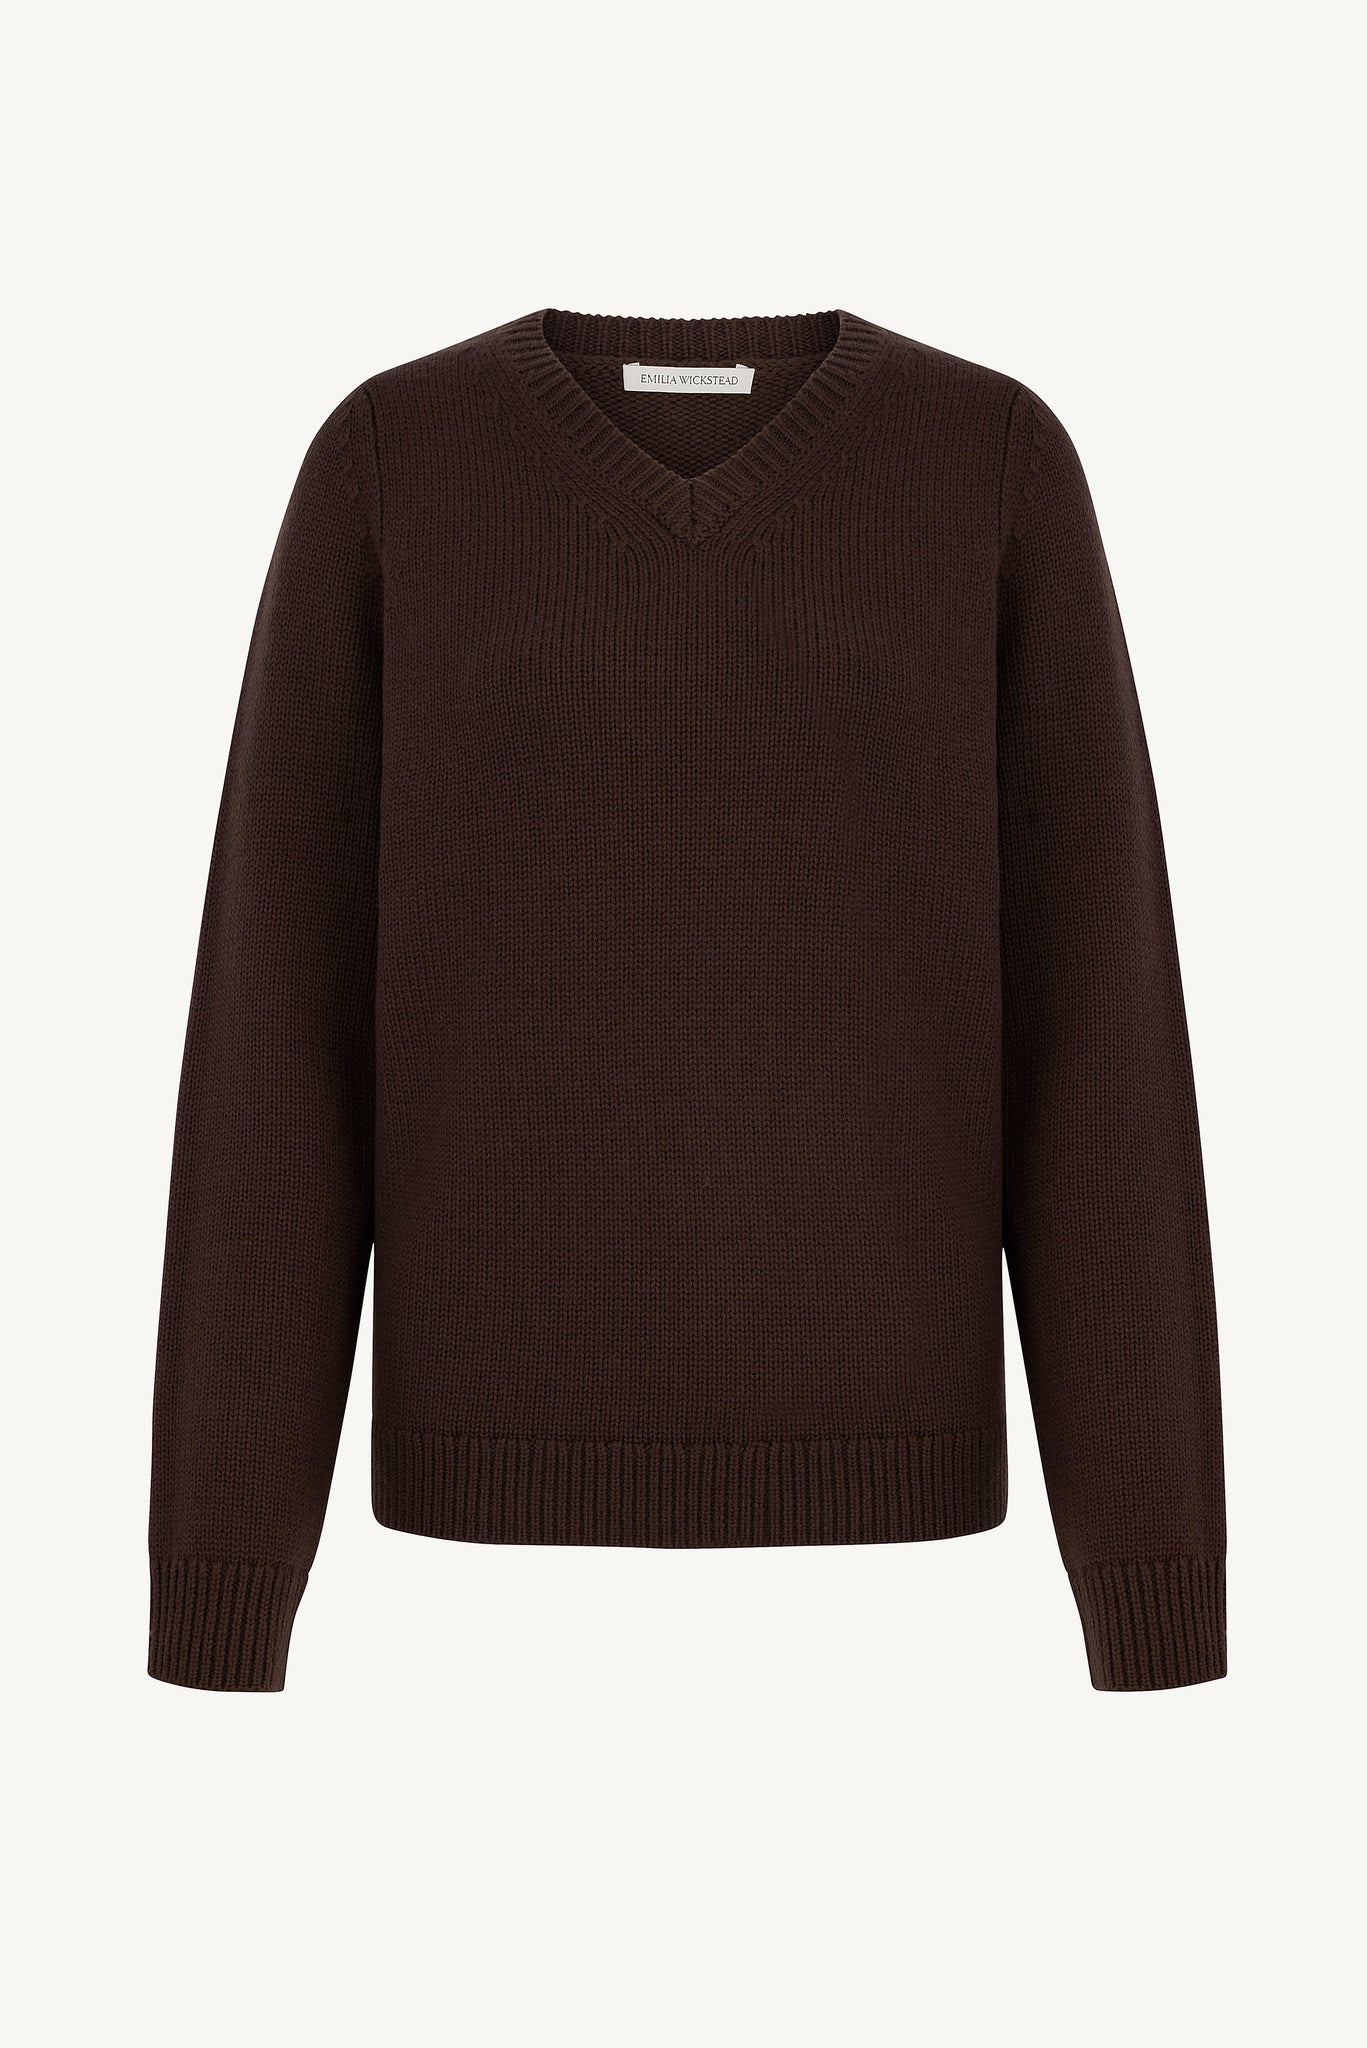 Pace Brown Knitted Jumper | Emilia Wickstead